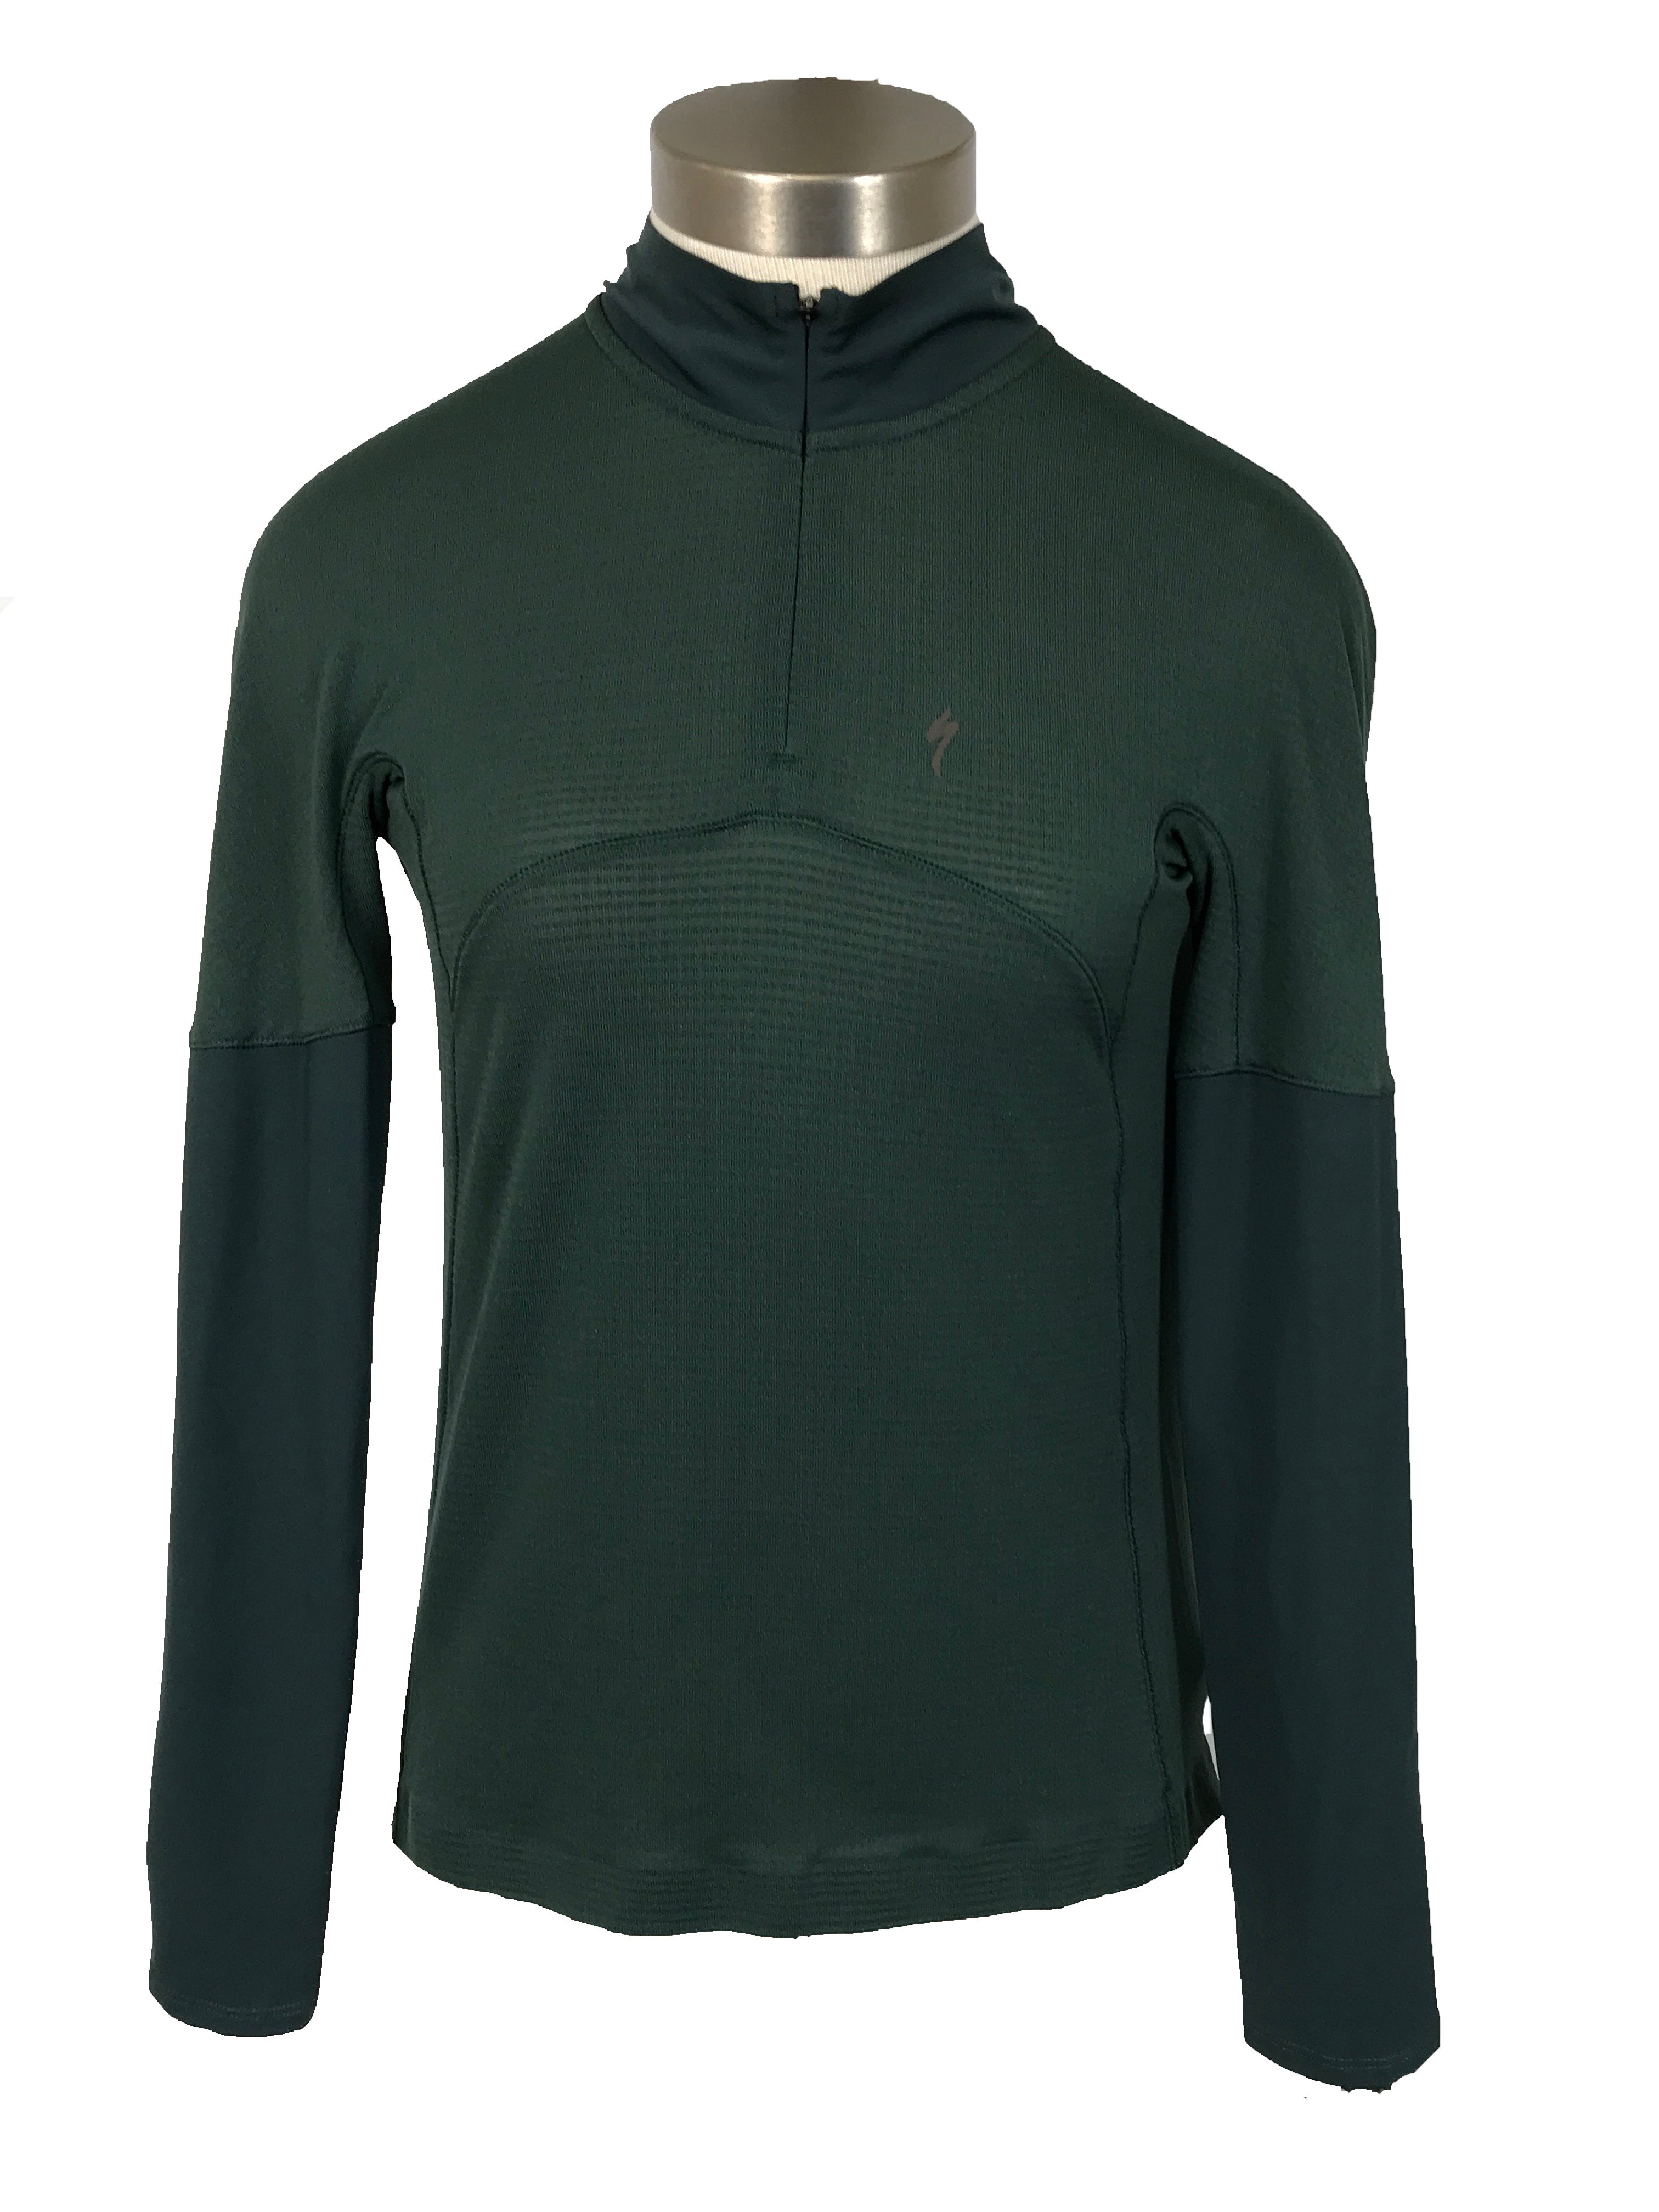 Specialized Prime Series Forest Green Thermal Long Sleeve Jersey Women's Size L NWT